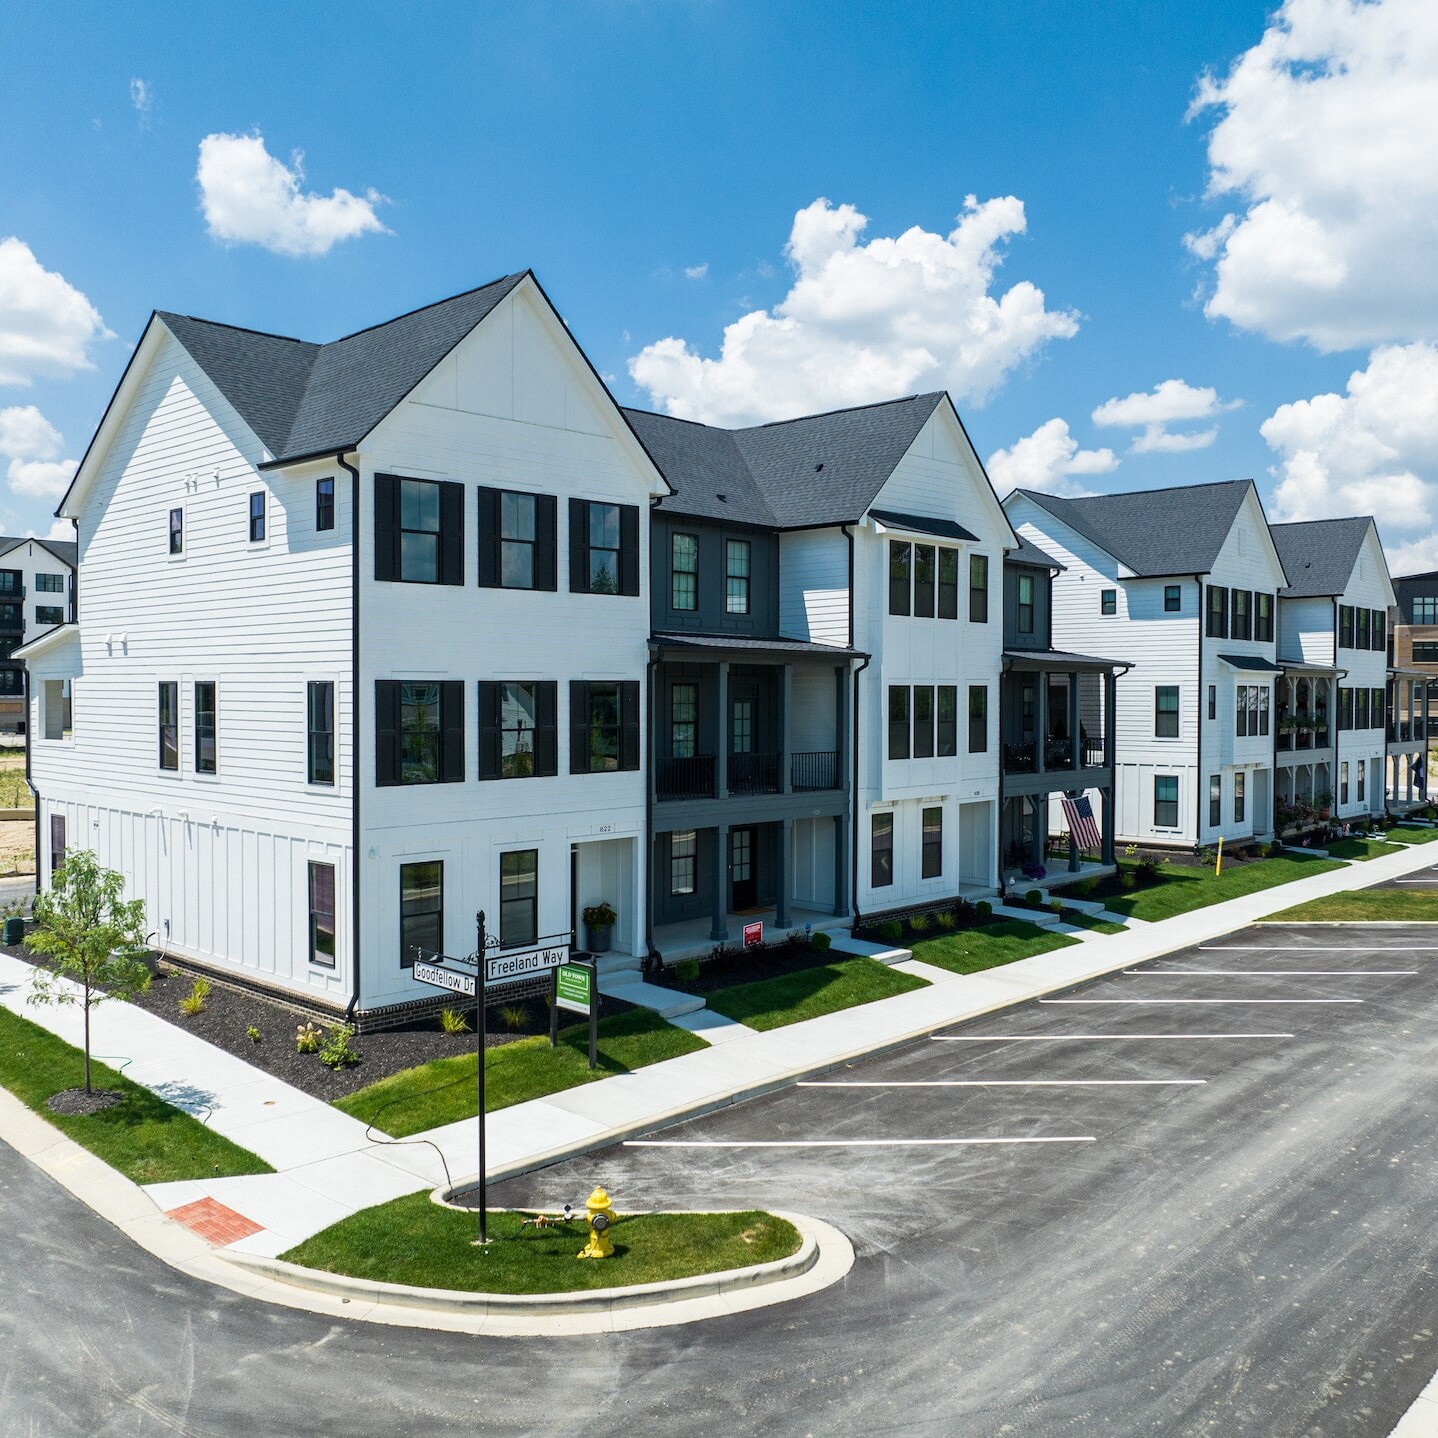 An aerial view of a row of apartment buildings in Carmel, Indiana.